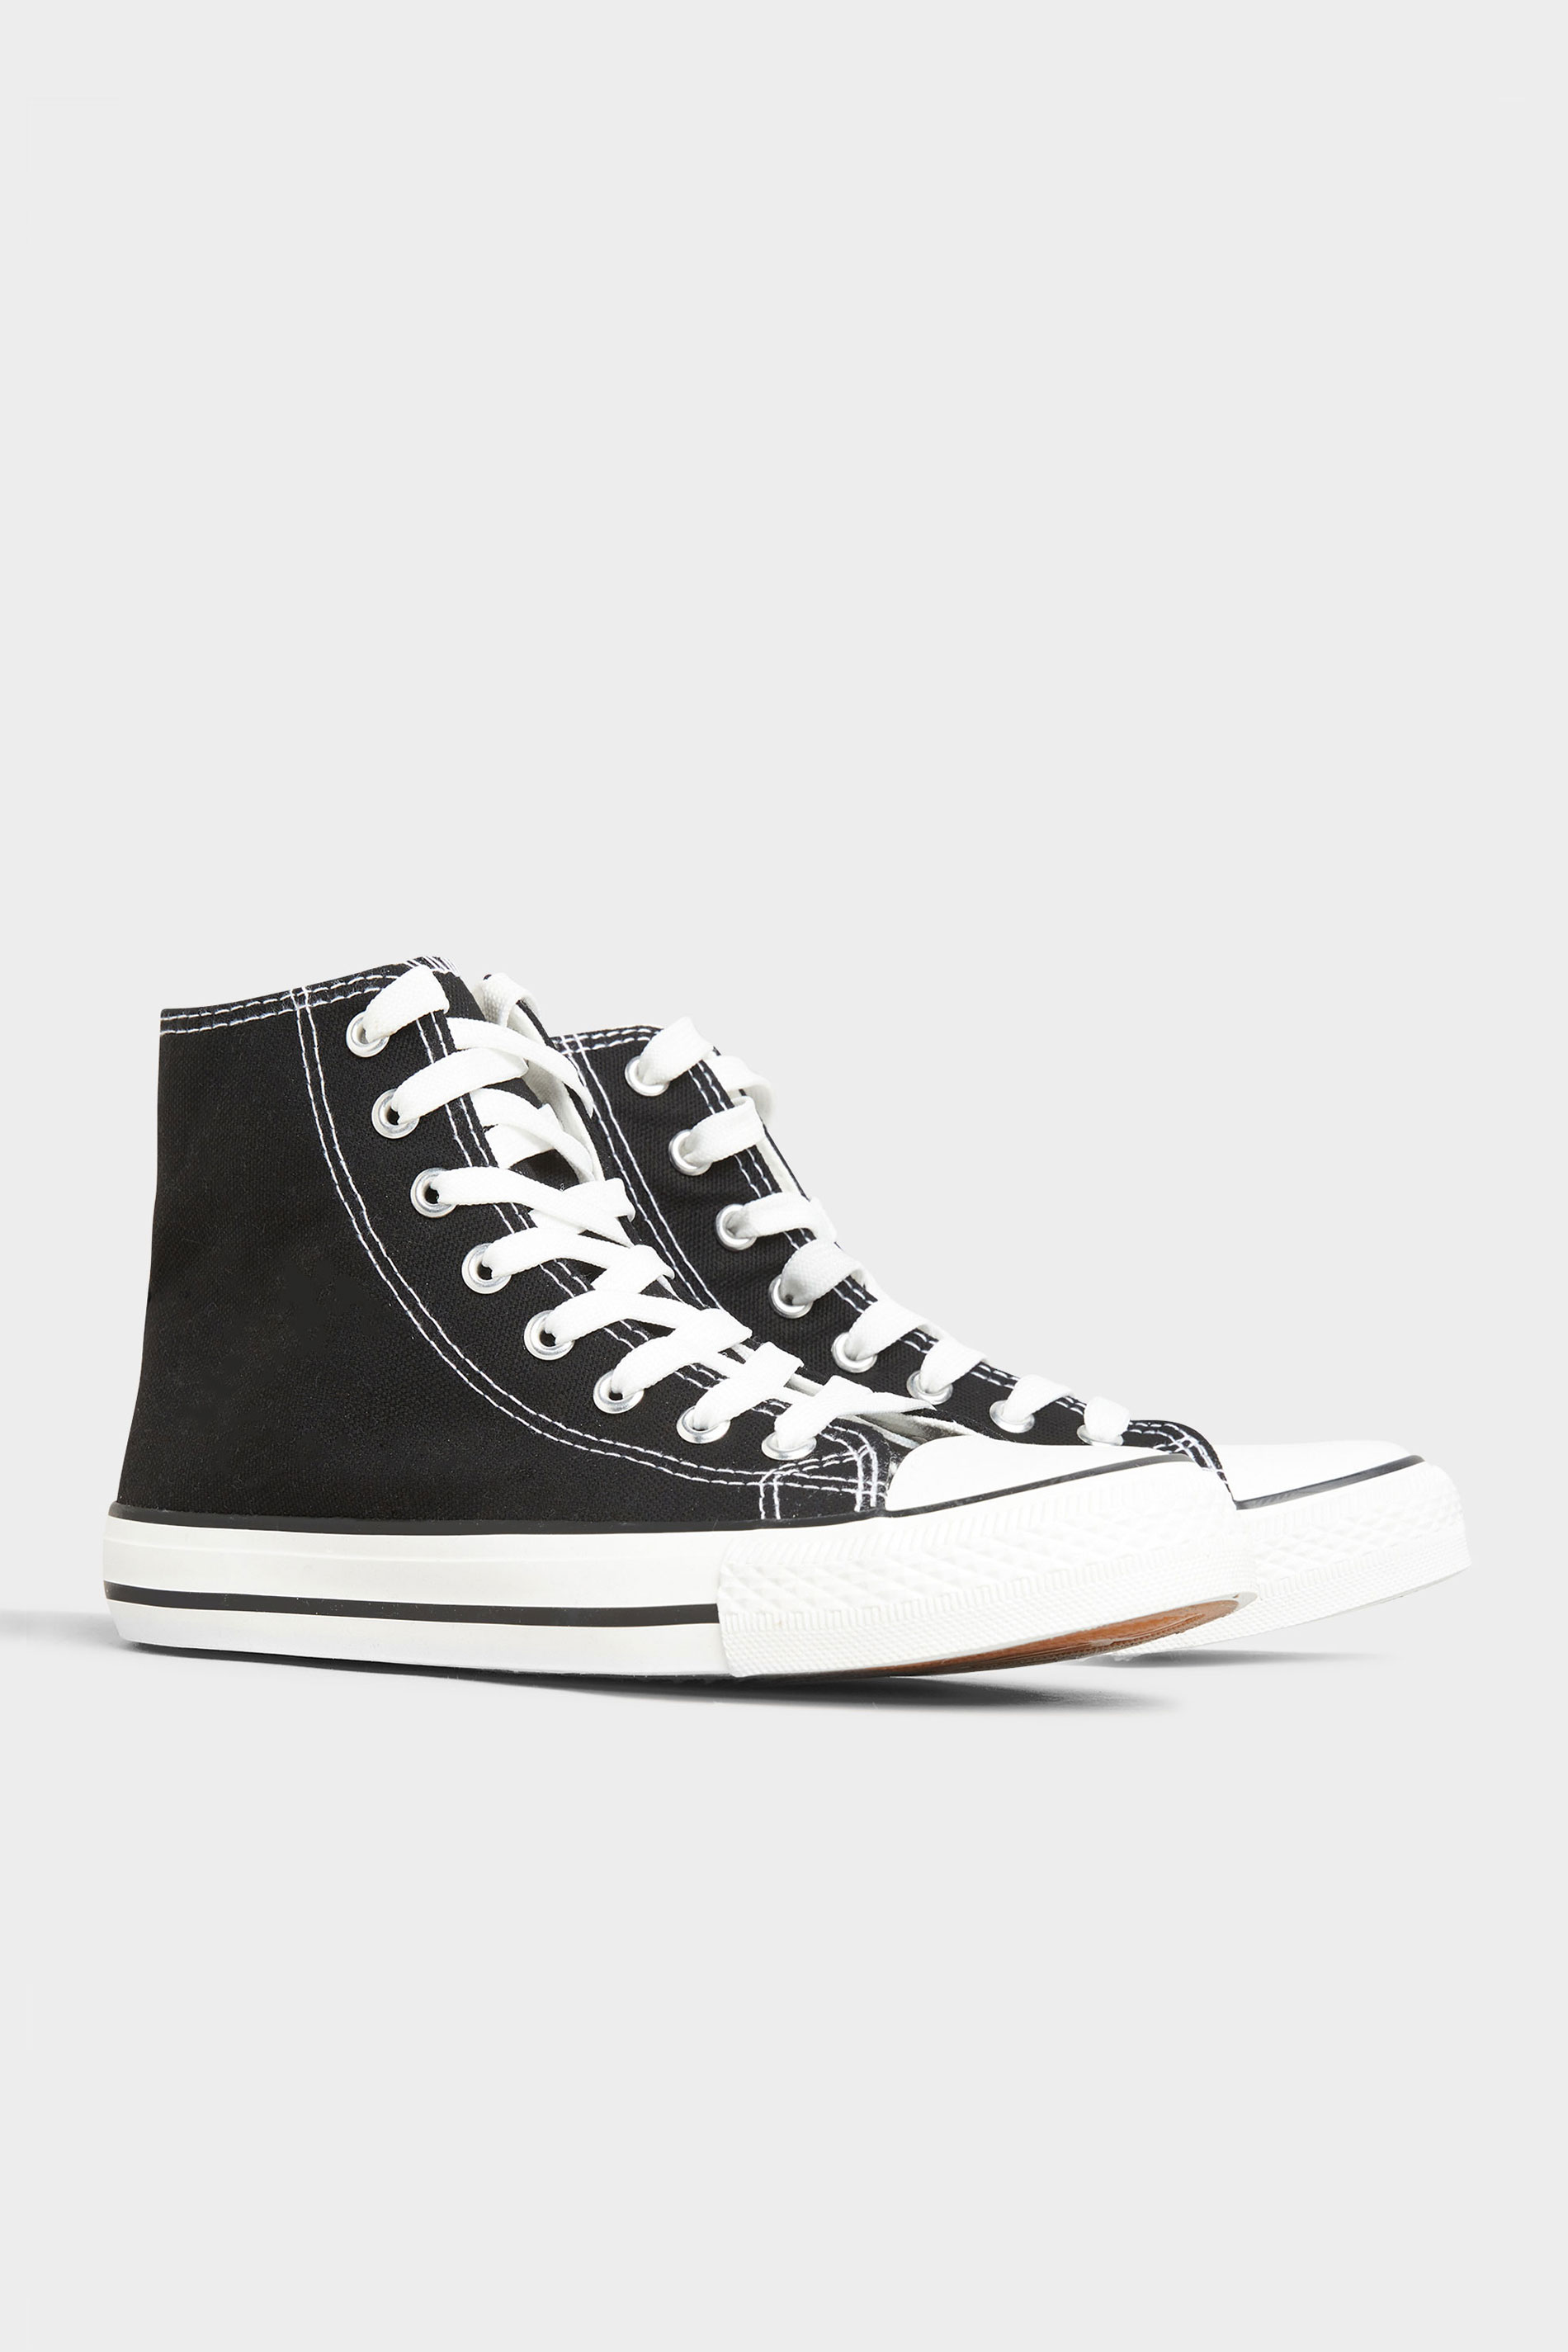 Black Canvas High Top Trainers In Wide Fit_B.jpg